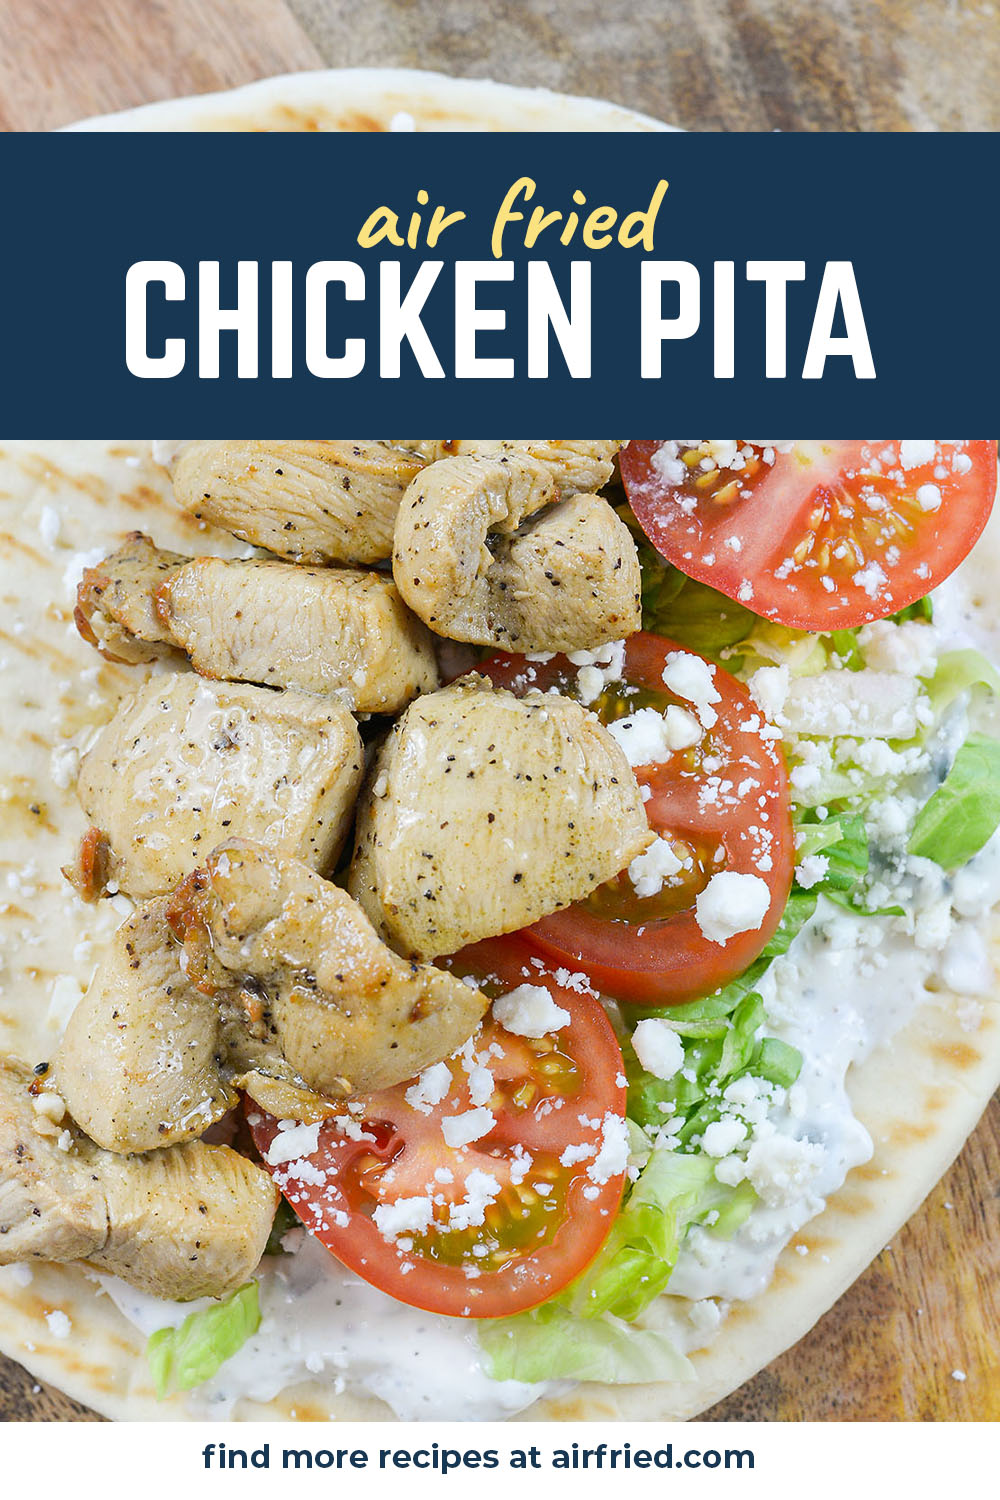 This chicken pita is flavored with Greek seasonings and air fried for convenience!